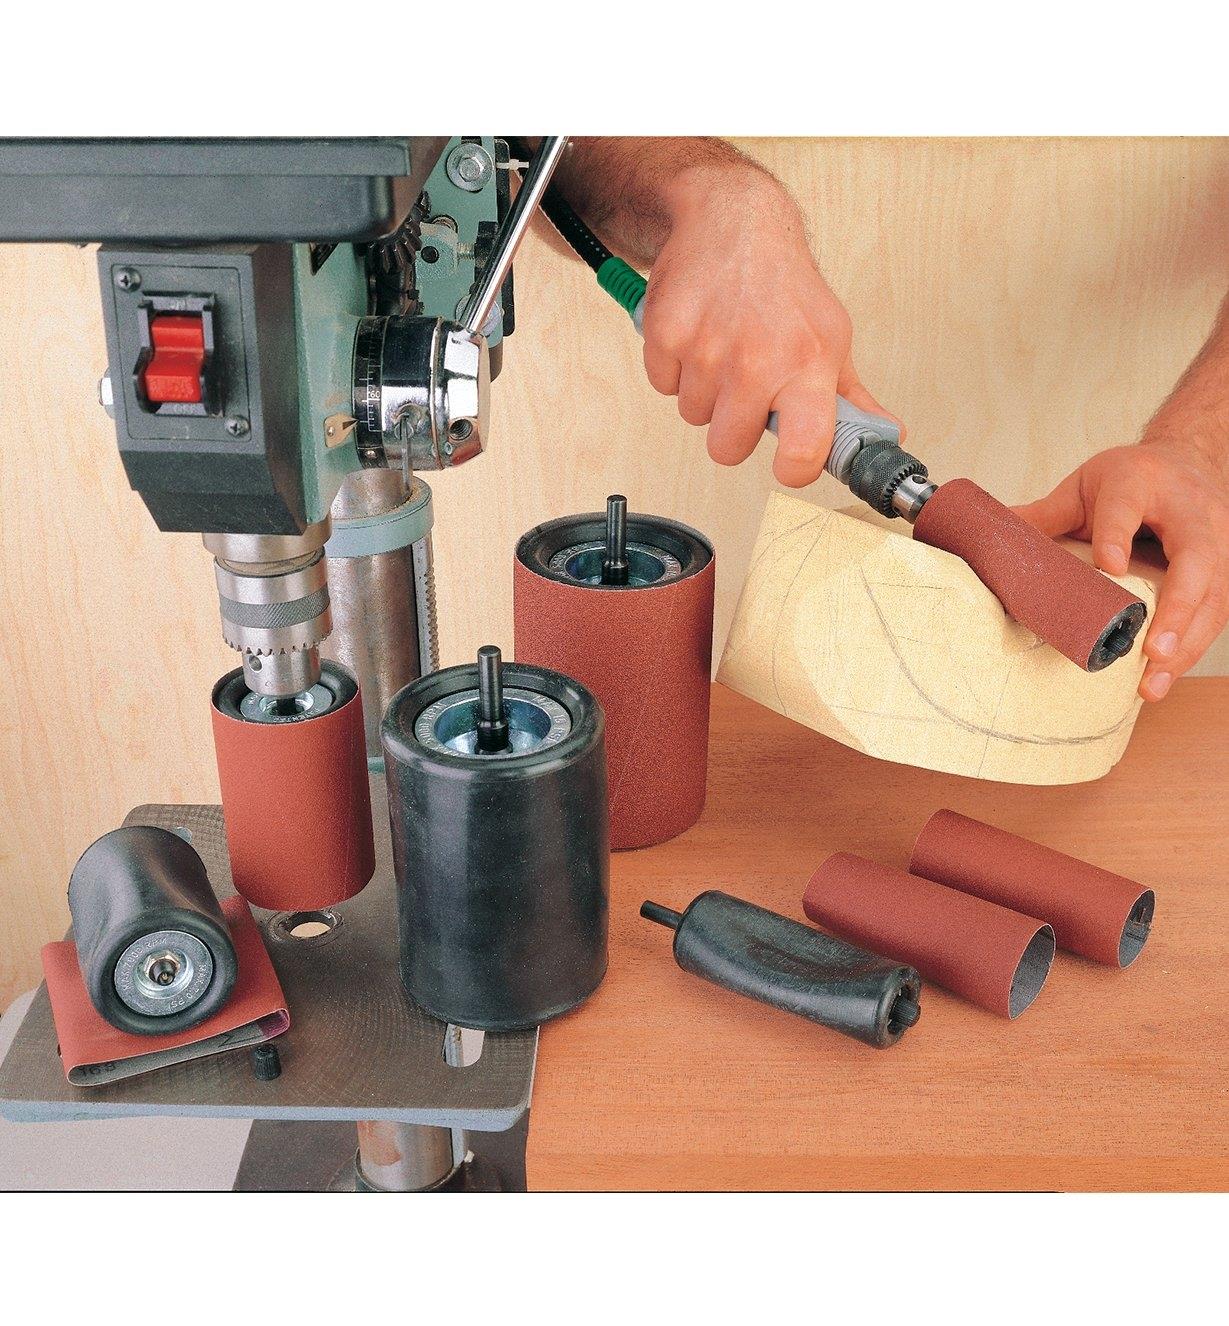 Pneumatic Sanding Drums being used on a drill press and on a flex shaft